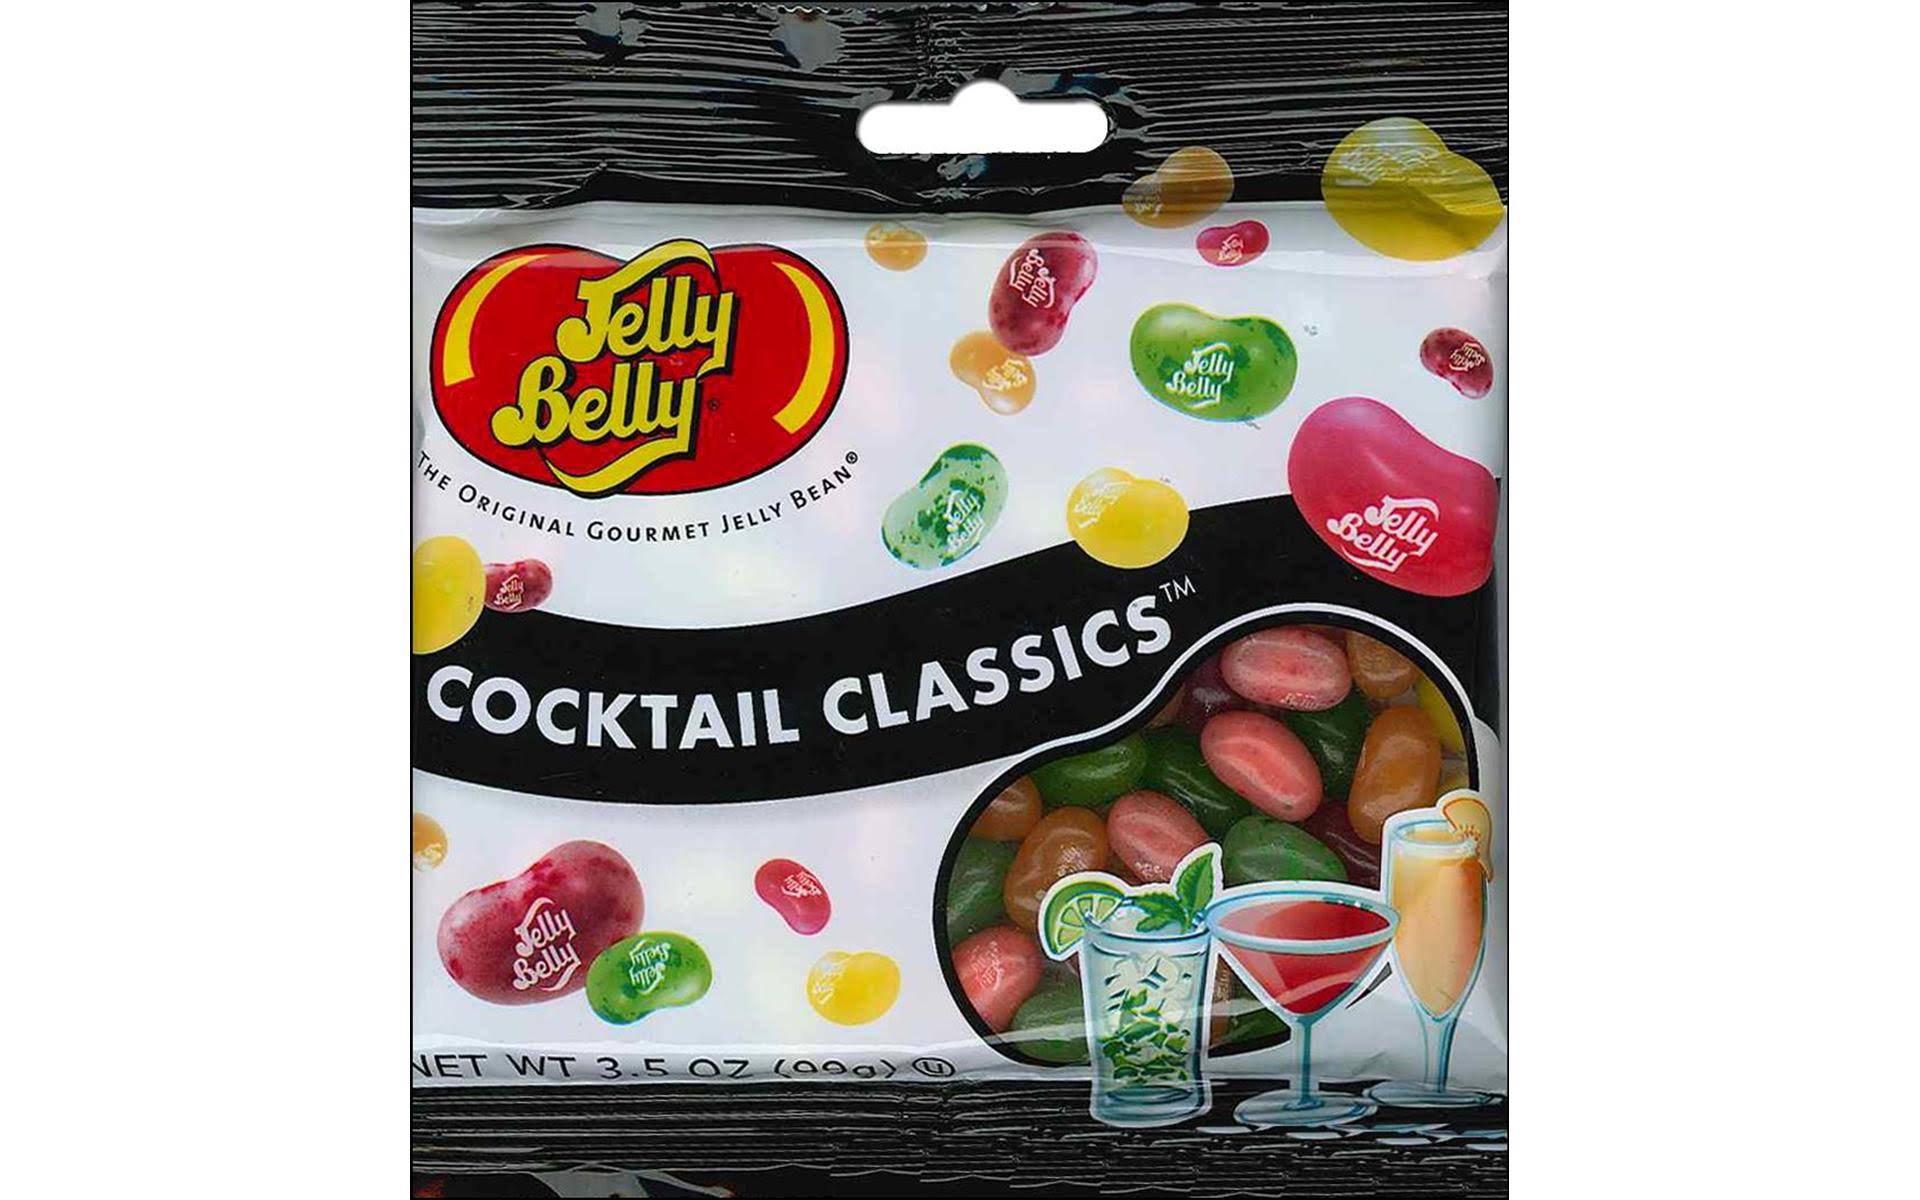 Jelly Belly Cocktail Classics Jelly Beans - 3.5oz, Assorted Flavors